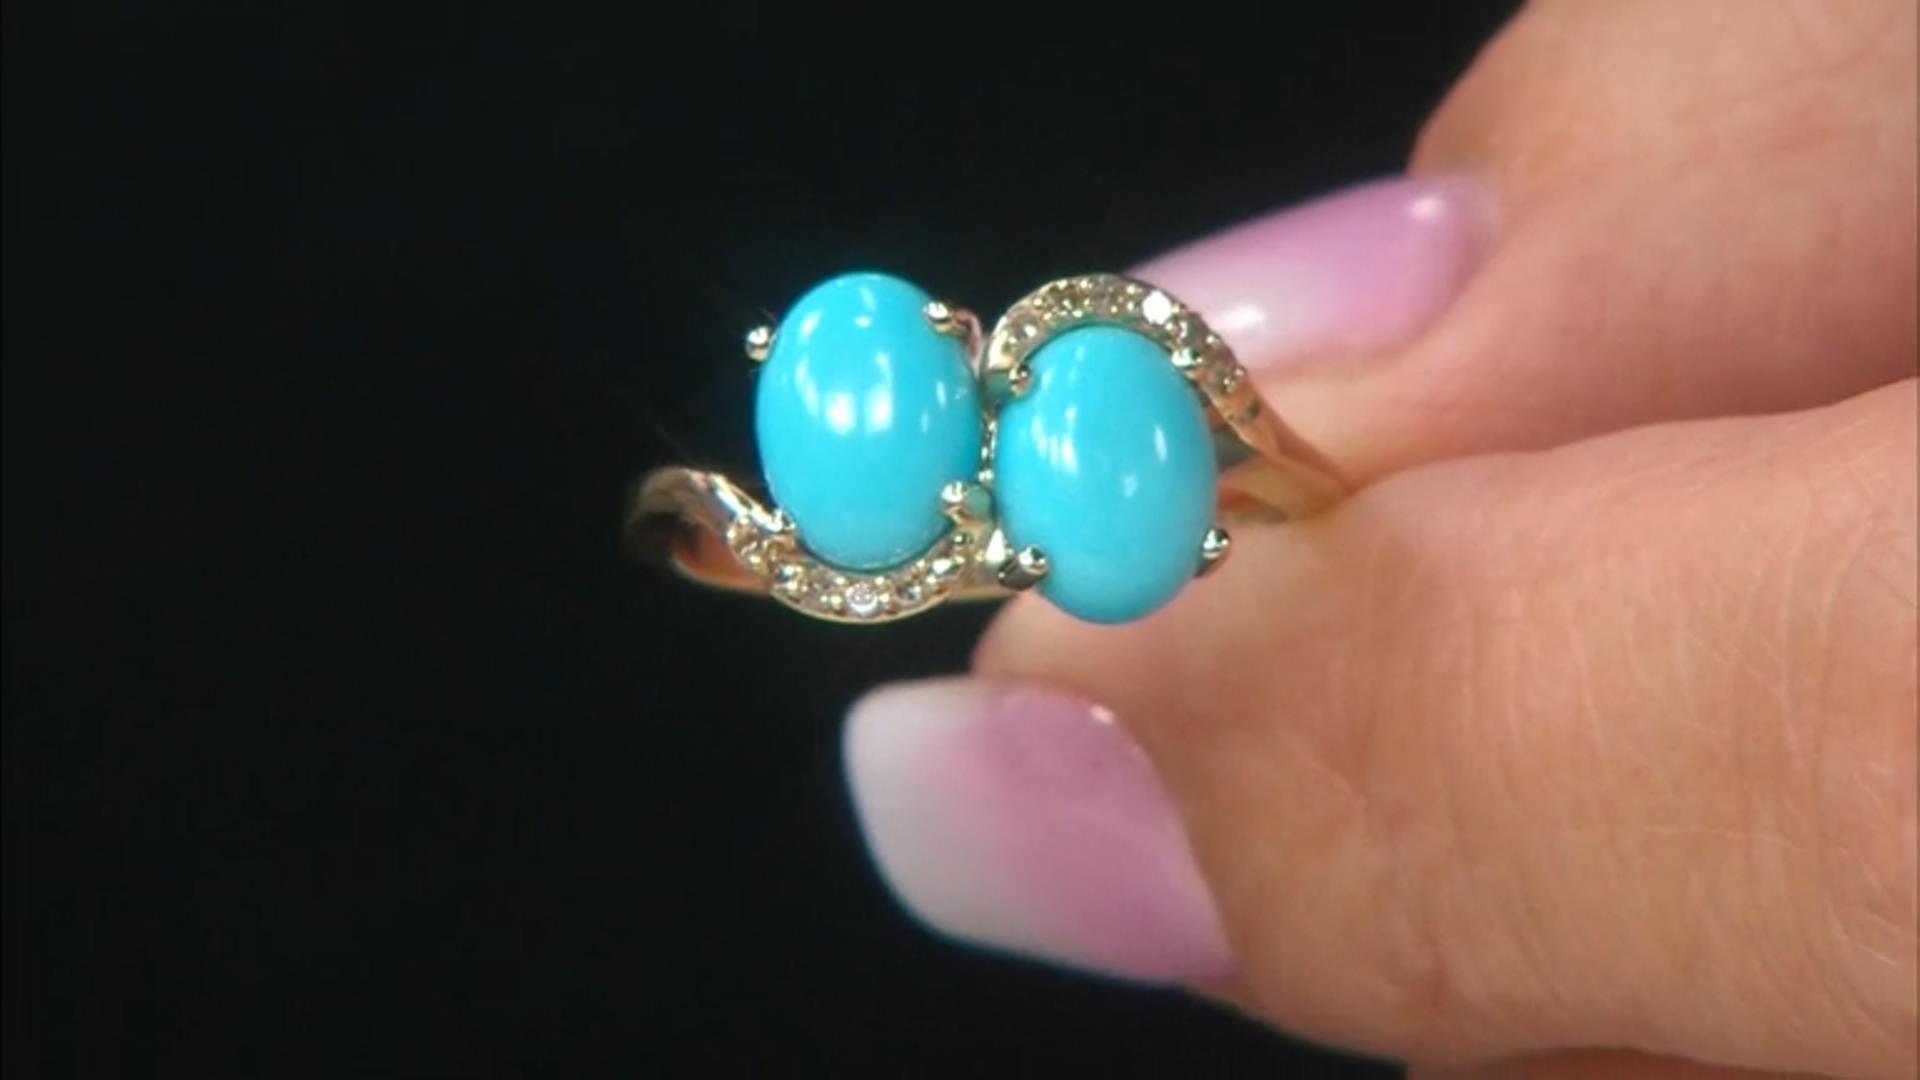 Blue Sleeping Beauty Turquoise With Champagne Diamonds 10k Yellow Gold Ring 0.06ctw Video Thumbnail